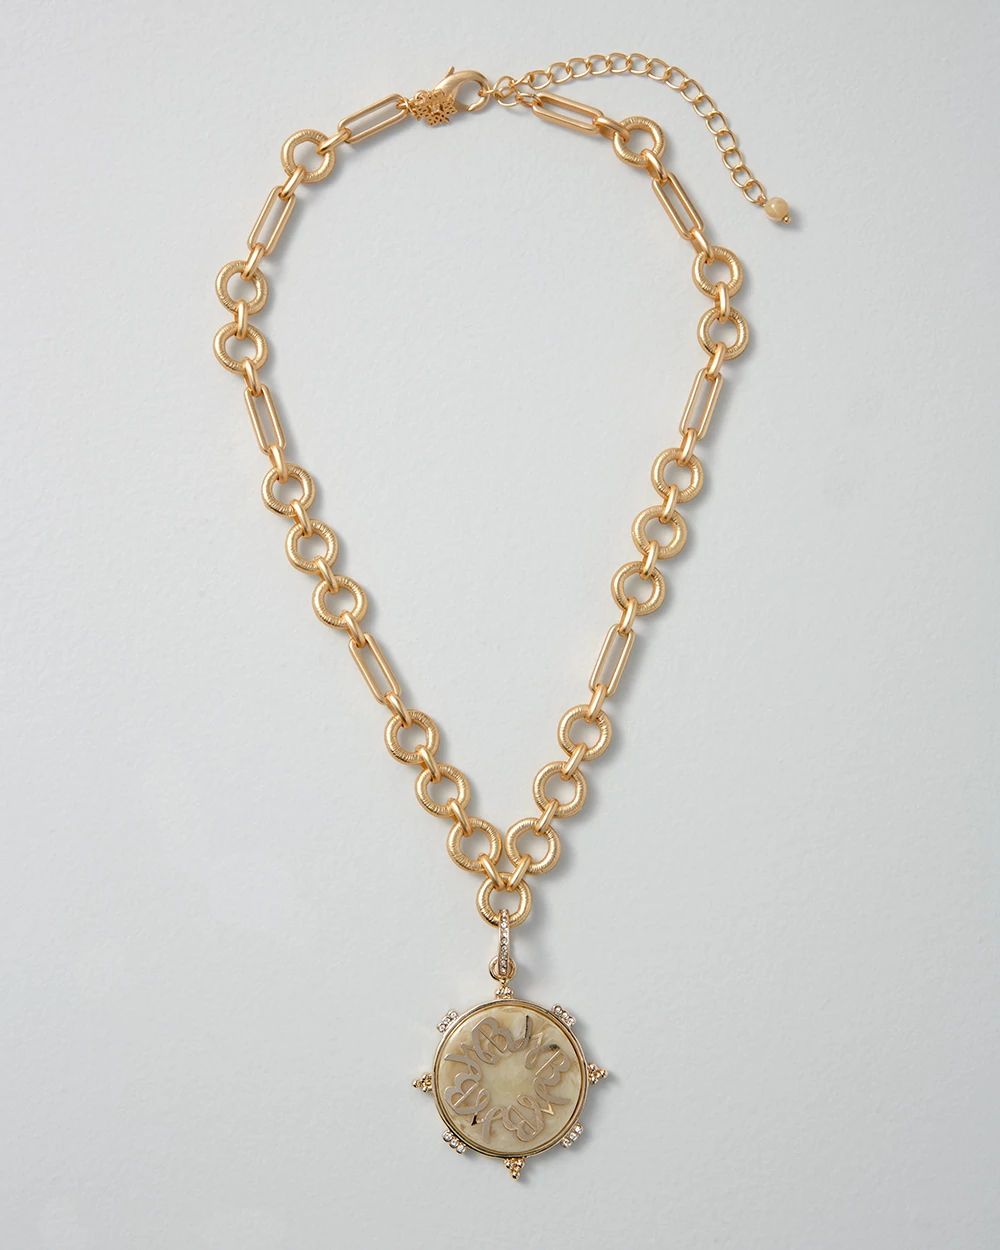 Goldtone Compass & Logo Necklace click to view larger image.